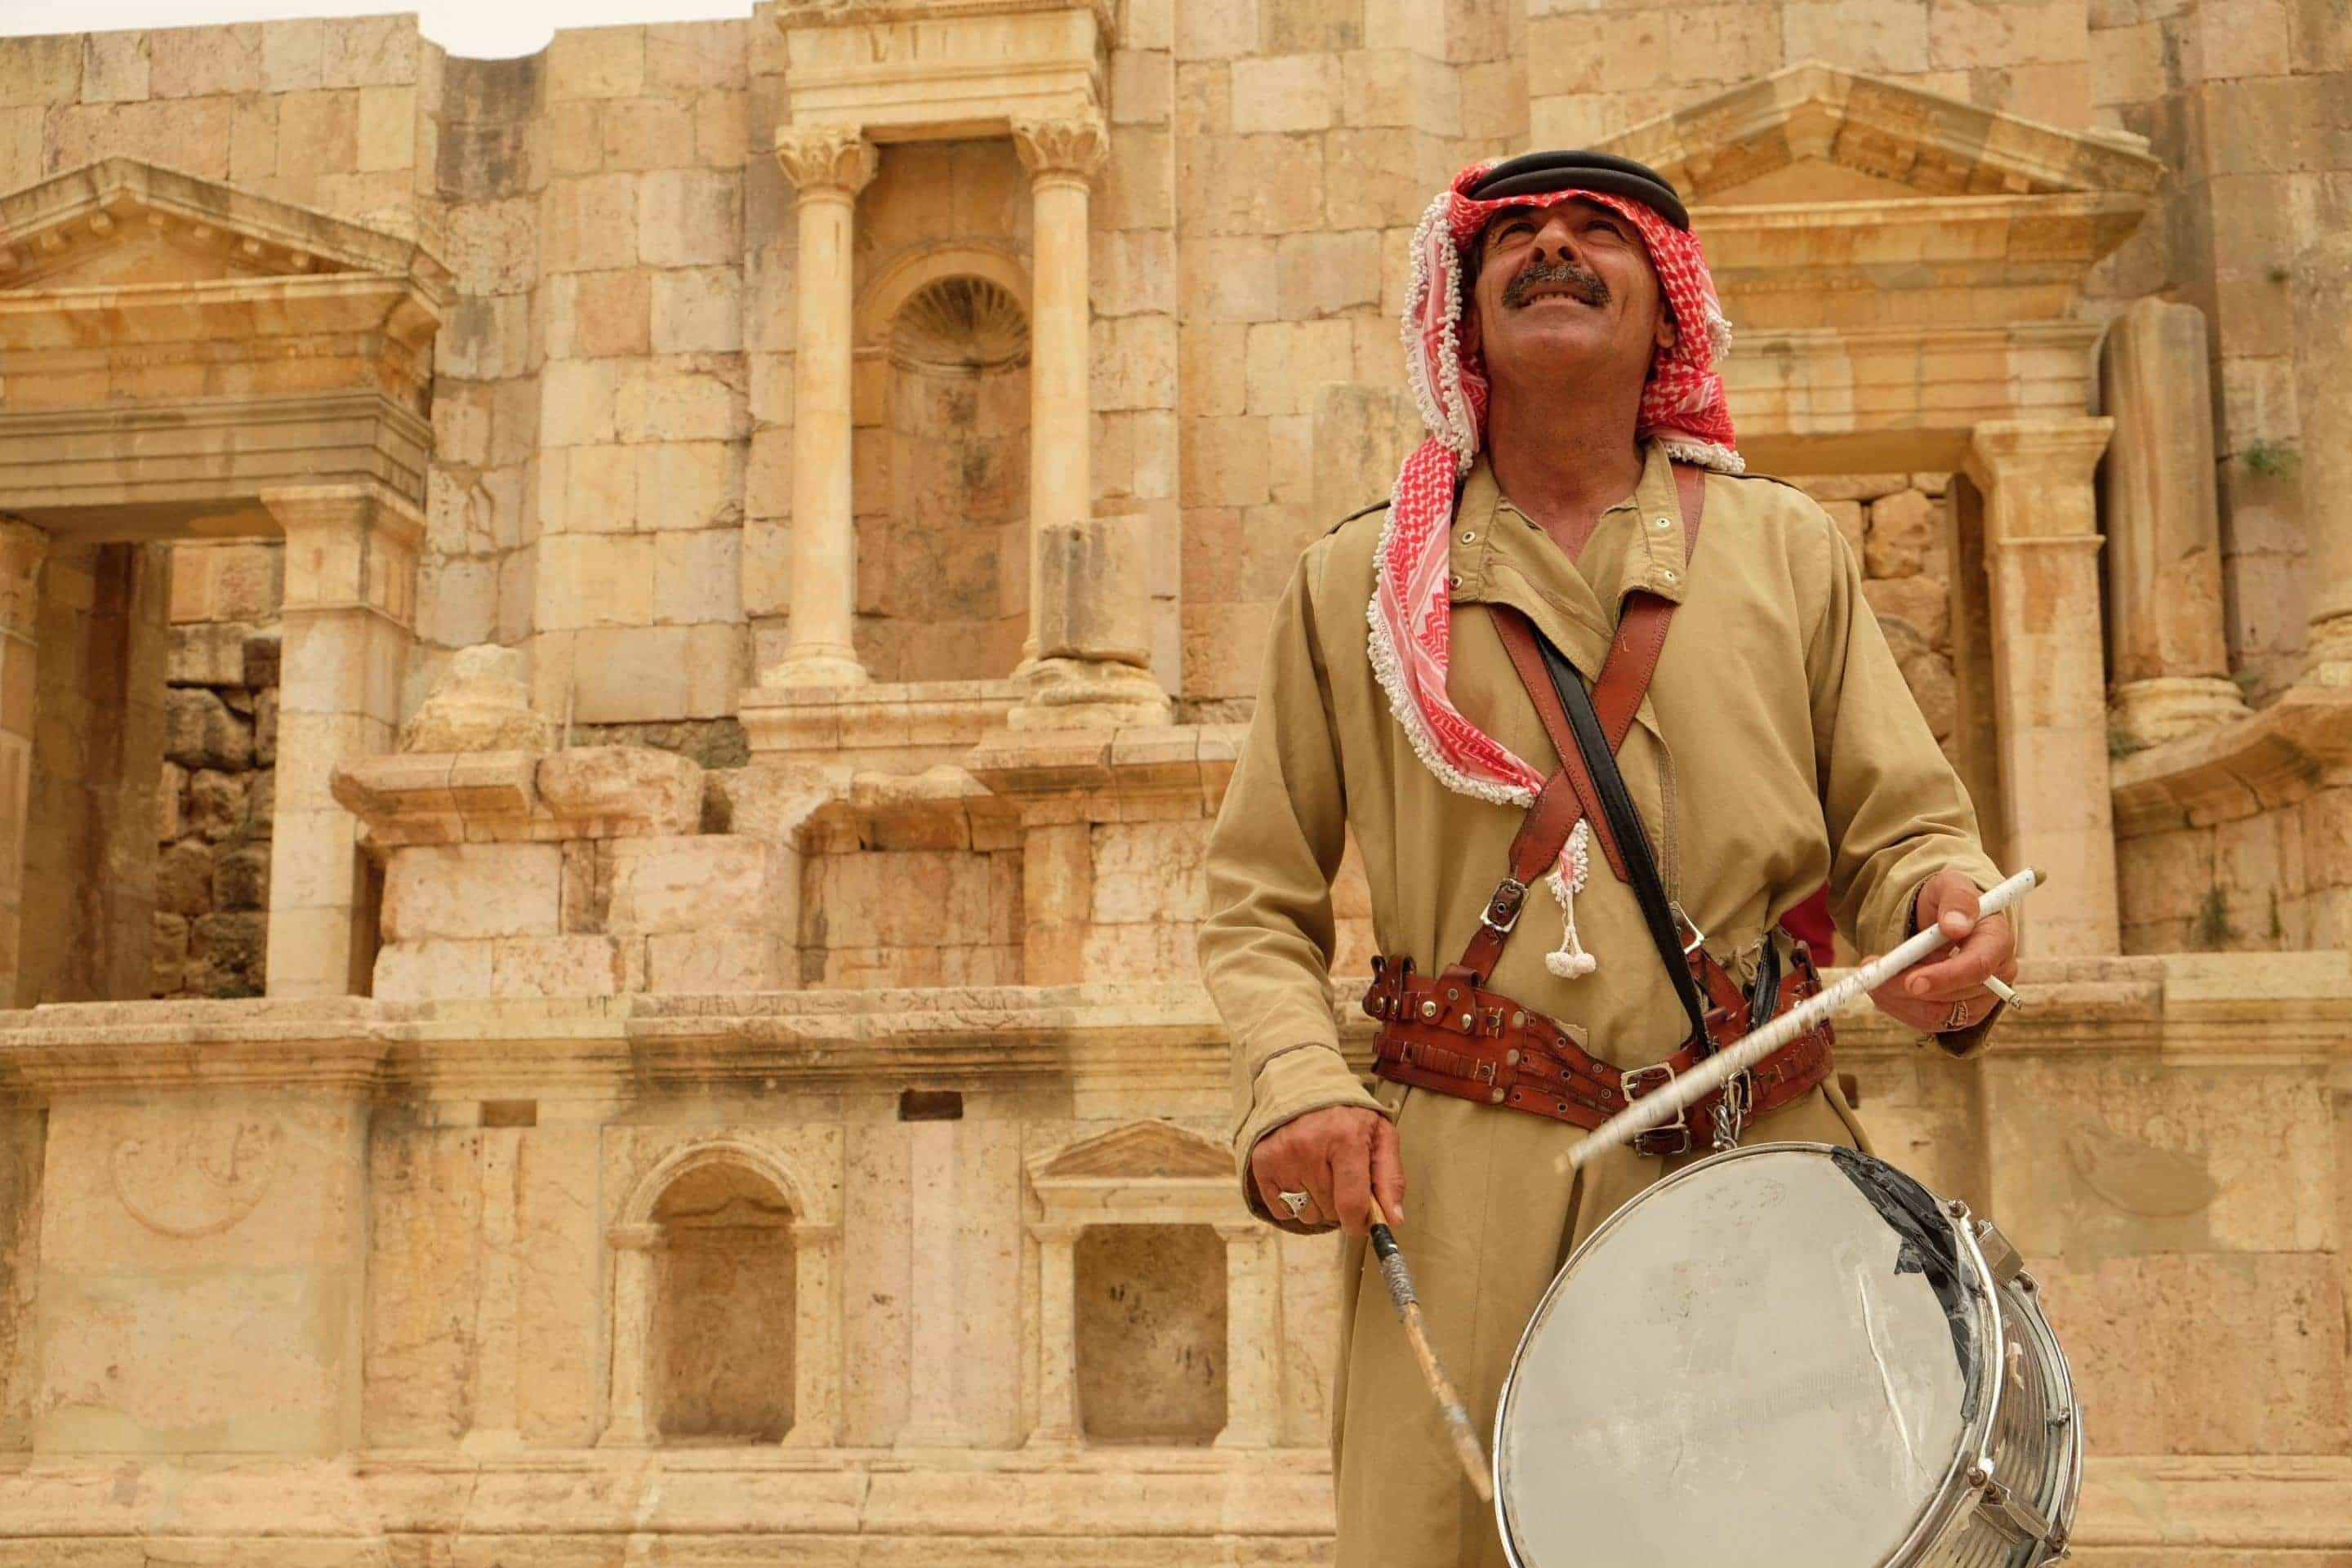 Traditional musicians entertain travelers at Jerash, demonstrating the spectacular acoustics in the amphitheatre. Photo: Genevieve Hathaway Photography.